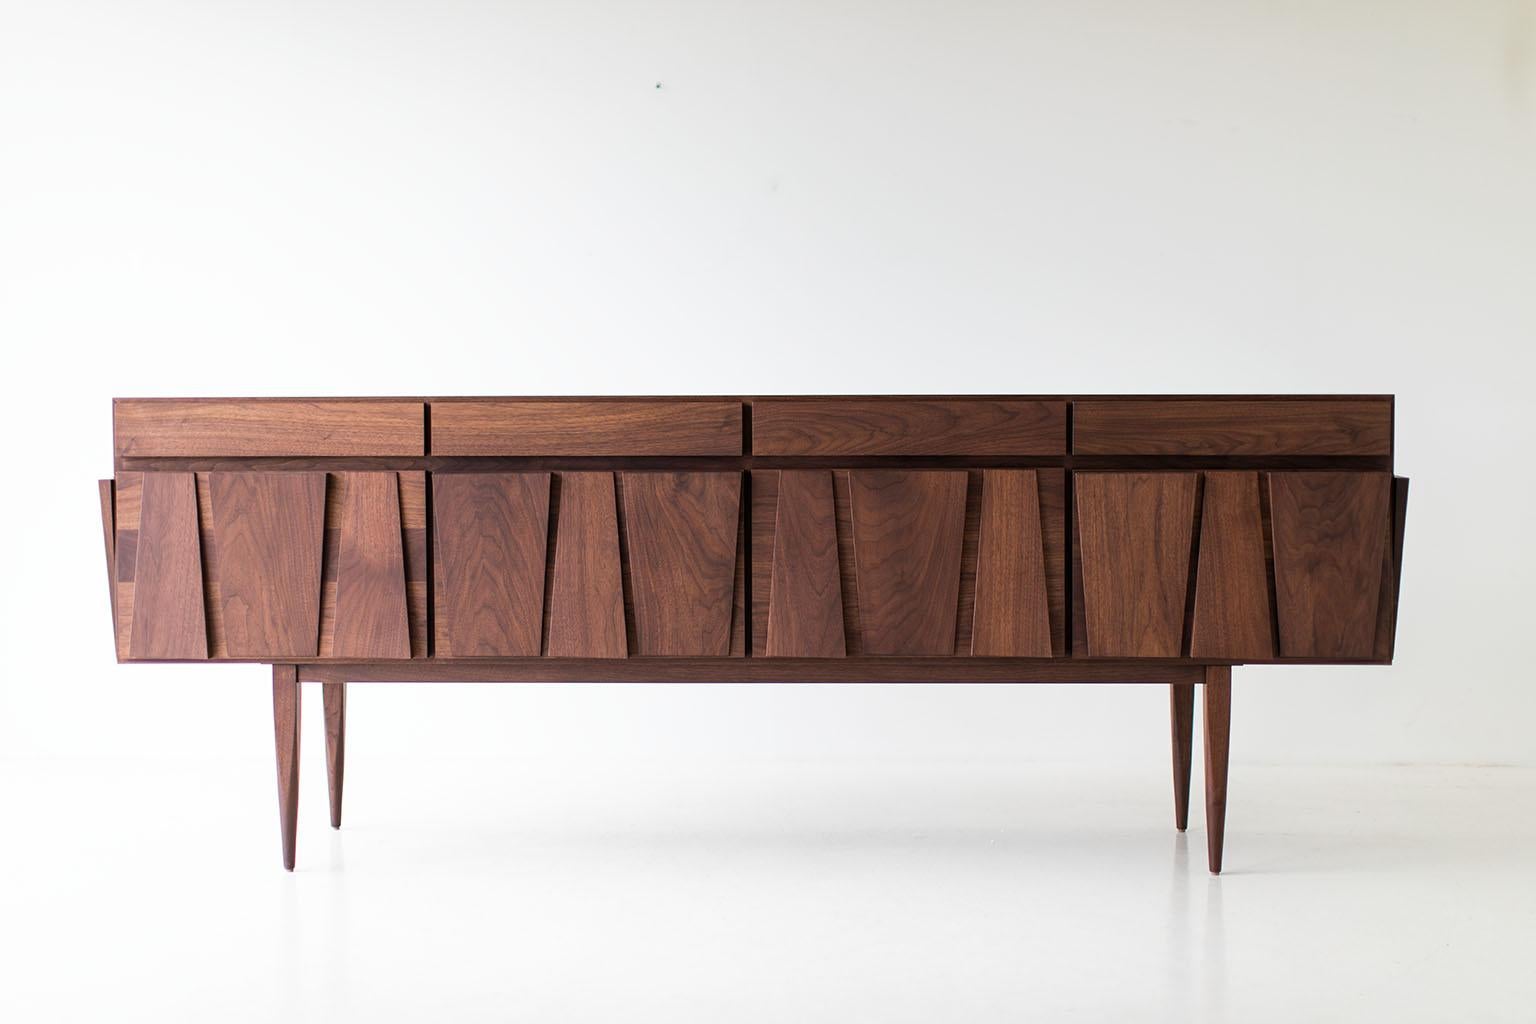 CraftAssociates Sideboard, Eiger Modern Walnut Sideboard

Modern Credenza - Craft Associates® Furniture is expertly crafted. The base is constructed by hand from hard wood and not machine. The walnut is then shaped by artisans and finished with a